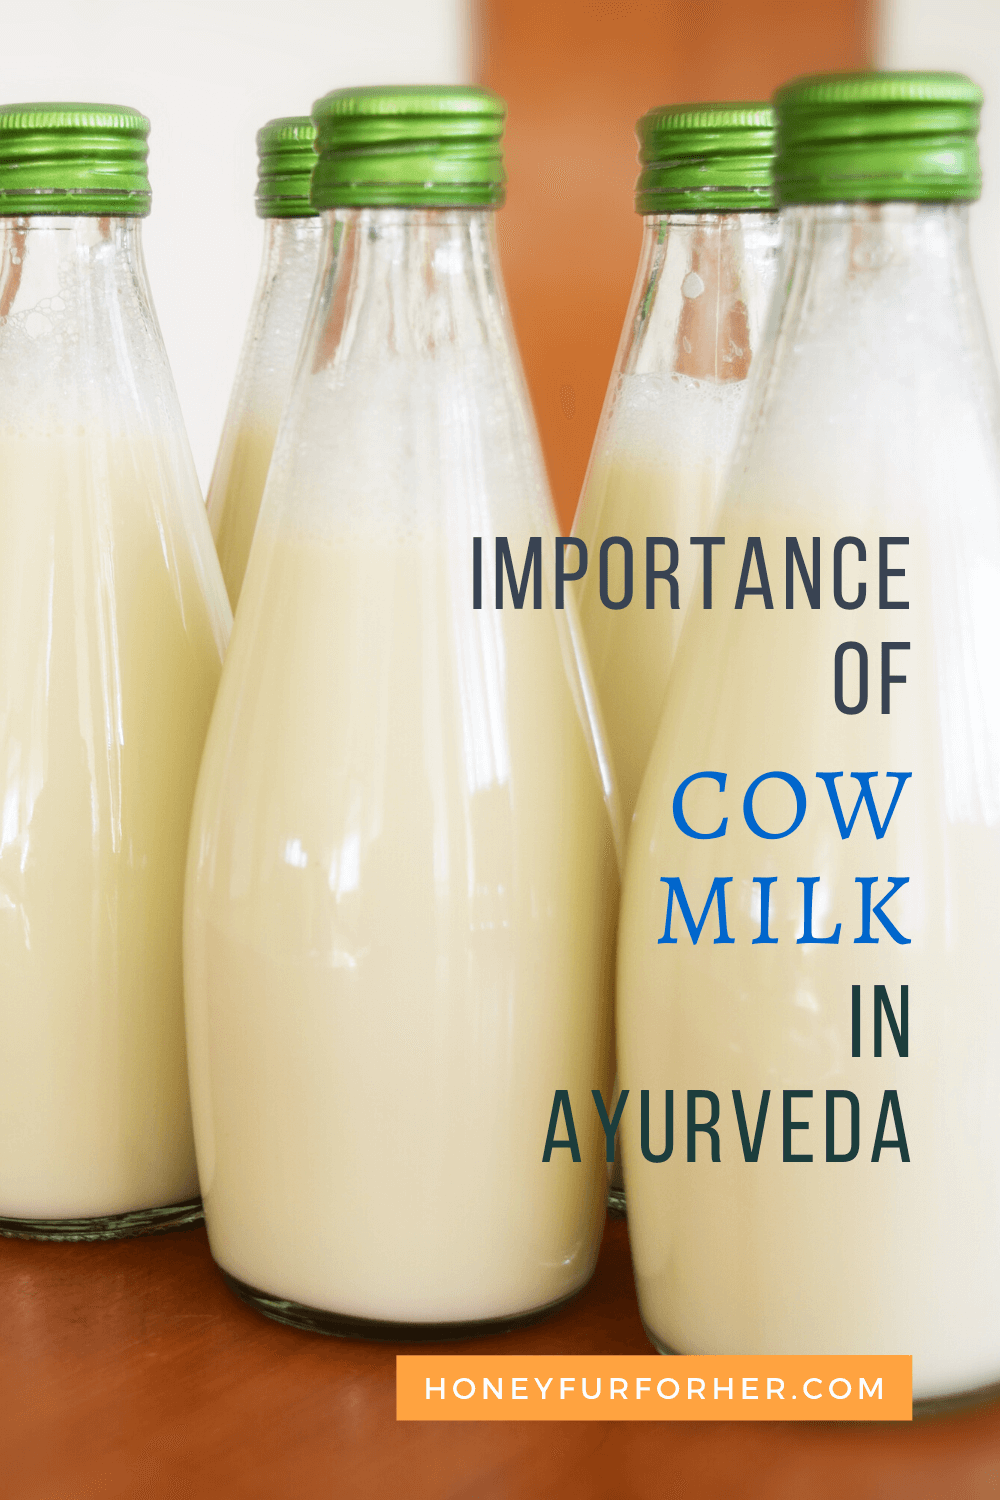 Importance Of Cow milk in Ayurveda Pinterest Pin Image